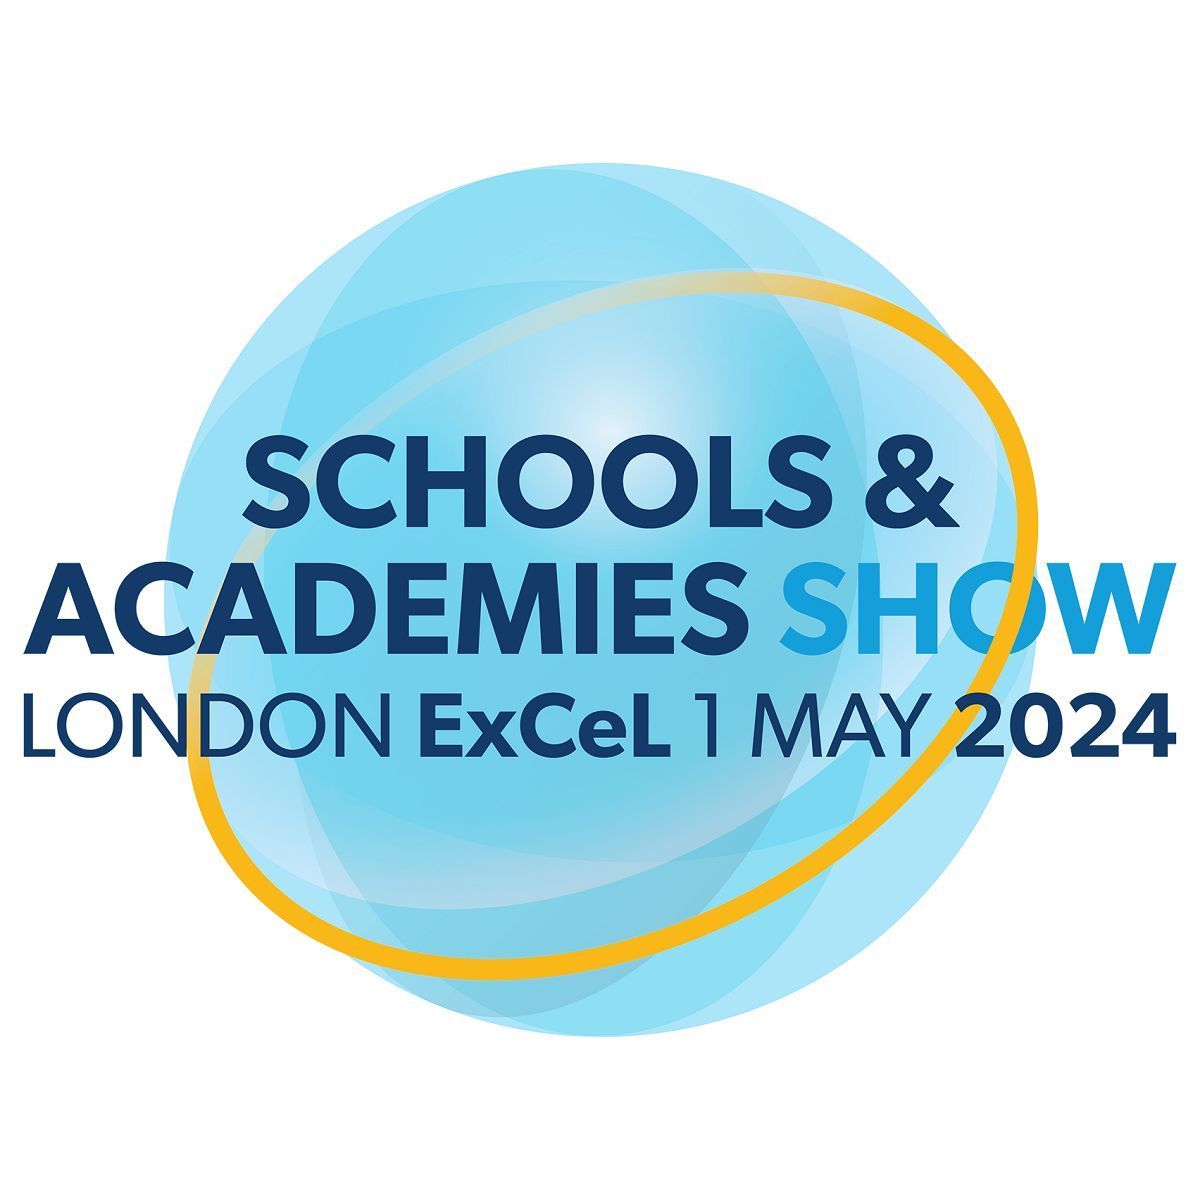 We are exhibiting at the #Schools & #Academies Show on 1st May at the ExCeL, London. Register for free to meet us and learn more about our service| buff.ly/42B94A9 #SAAShow #FanSAAStic @SAA_Show